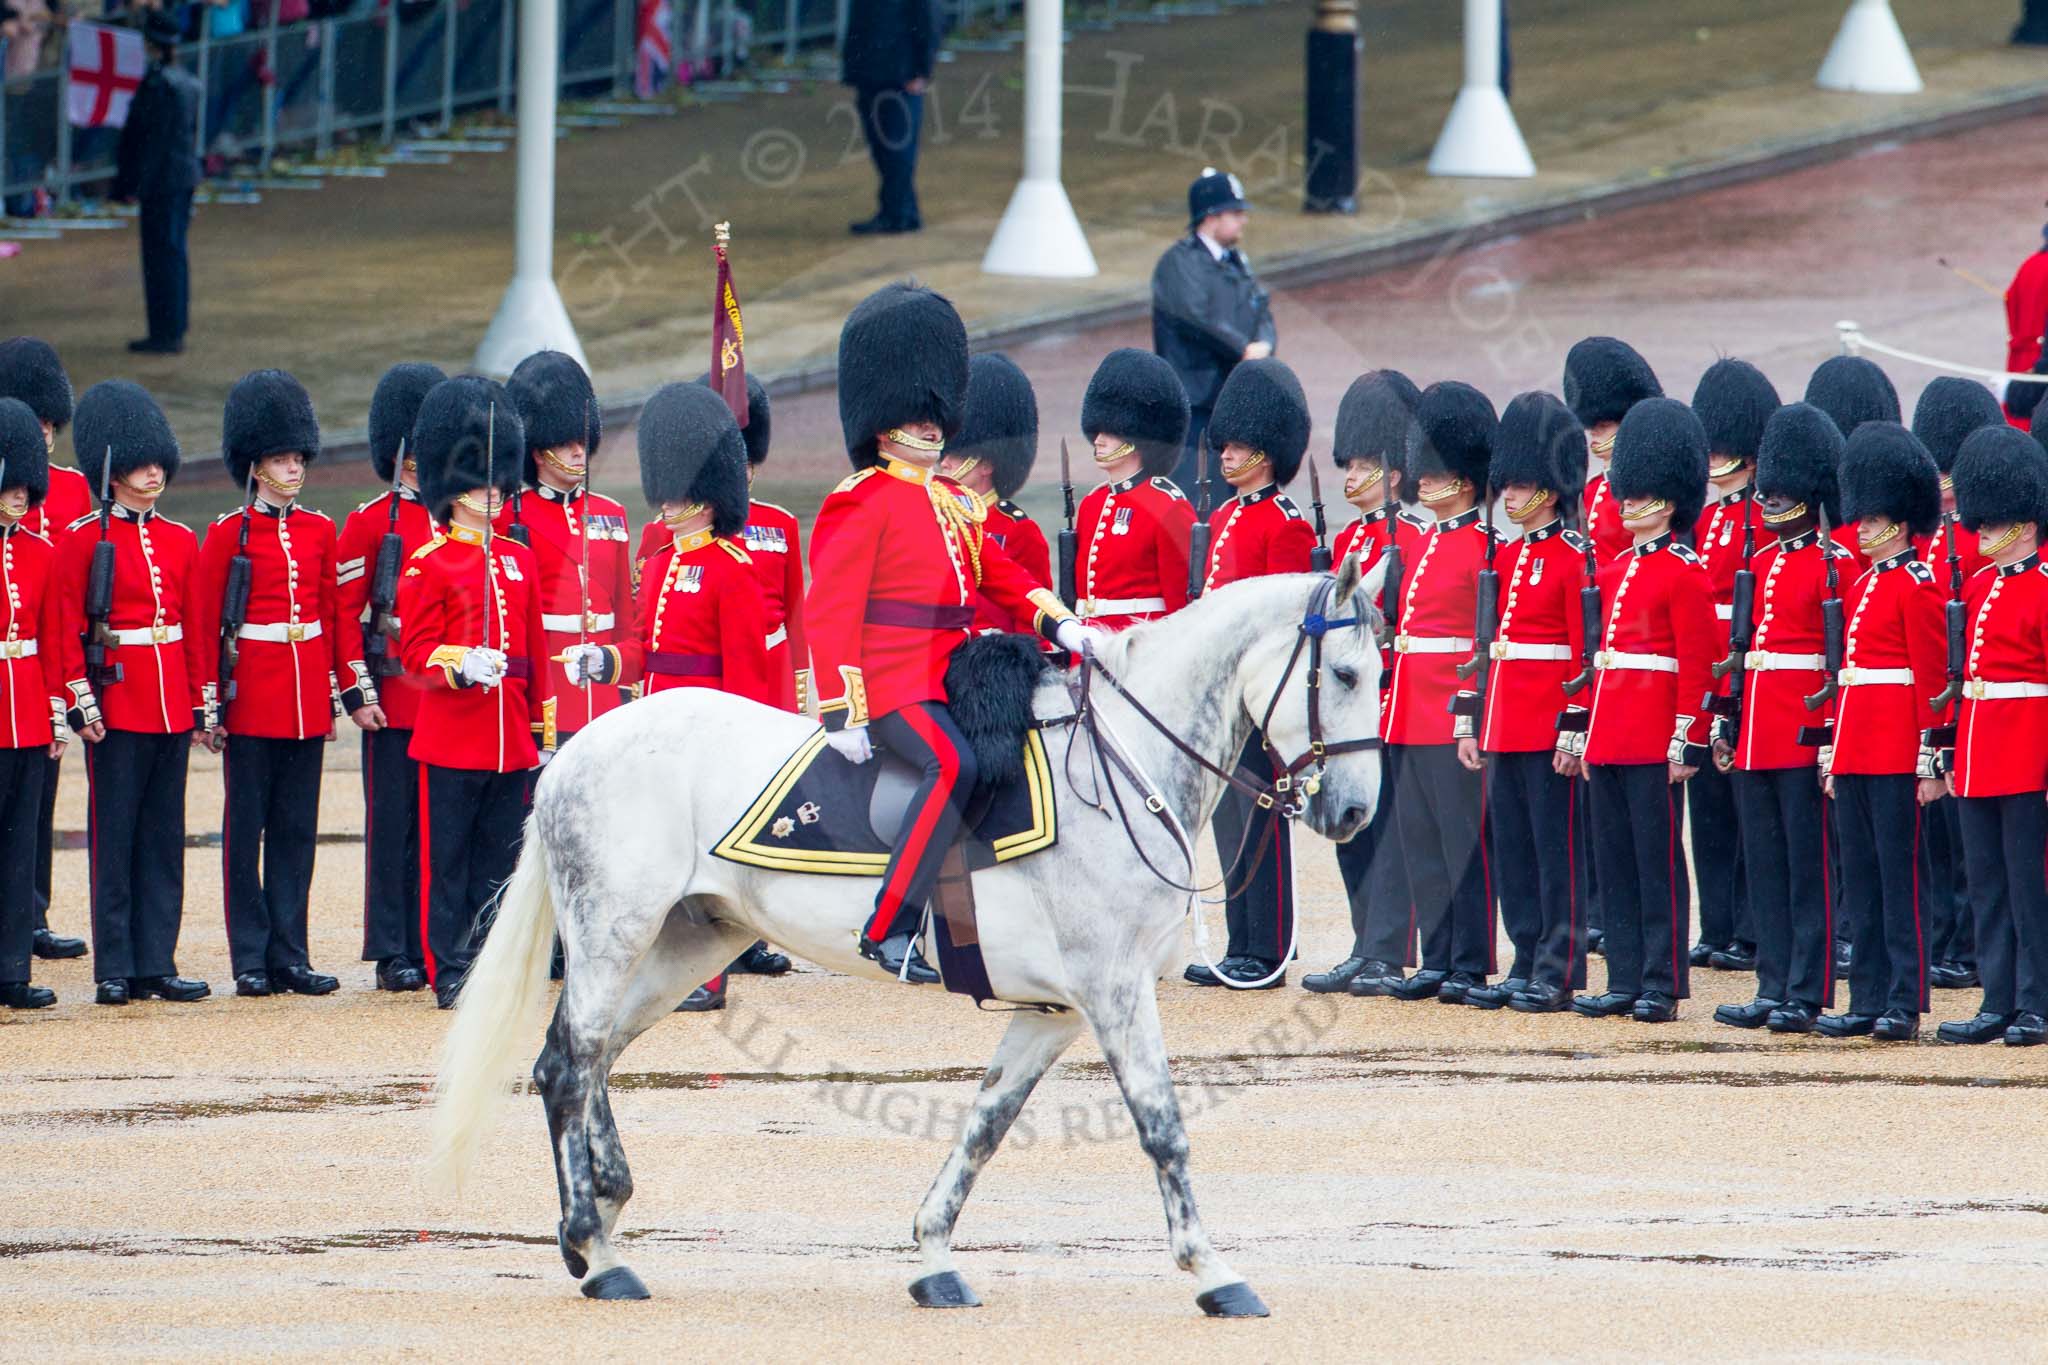 The Colonel's Review 2014.
Horse Guards Parade, Westminster,
London,

United Kingdom,
on 07 June 2014 at 11:02, image #287